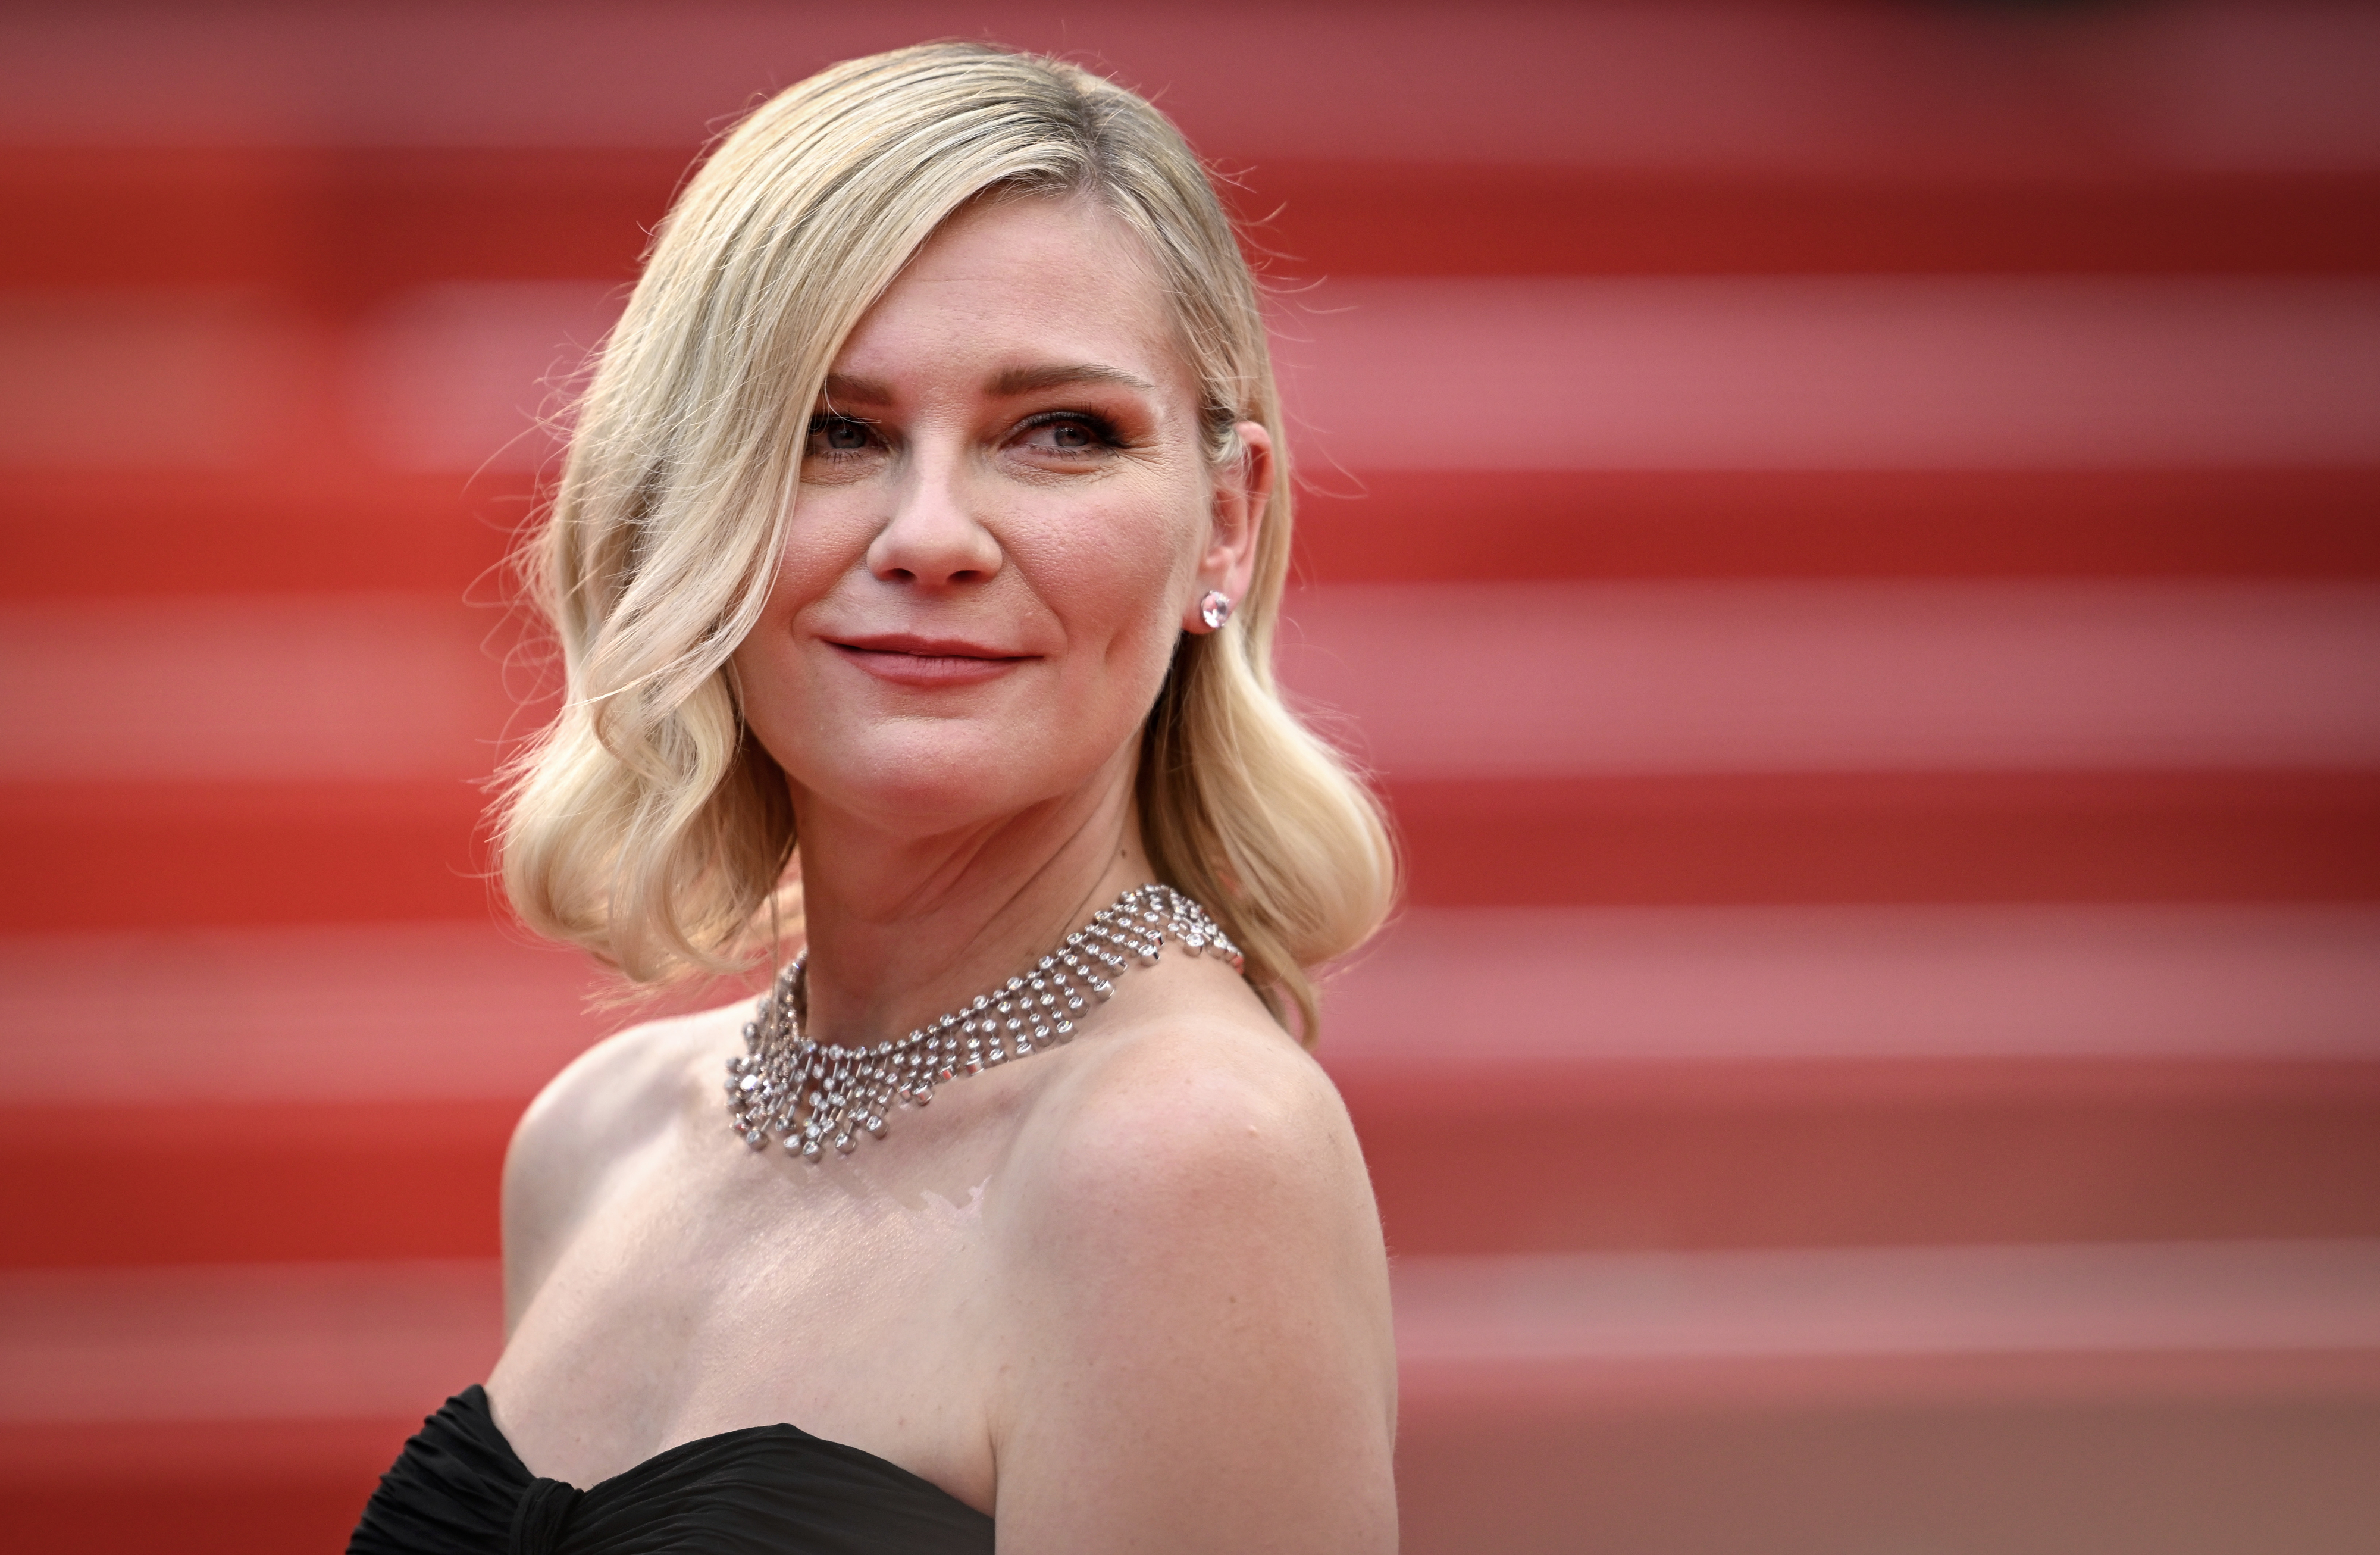 Kirsten Dunst in strapless attire with a diamond necklace, posing at an event